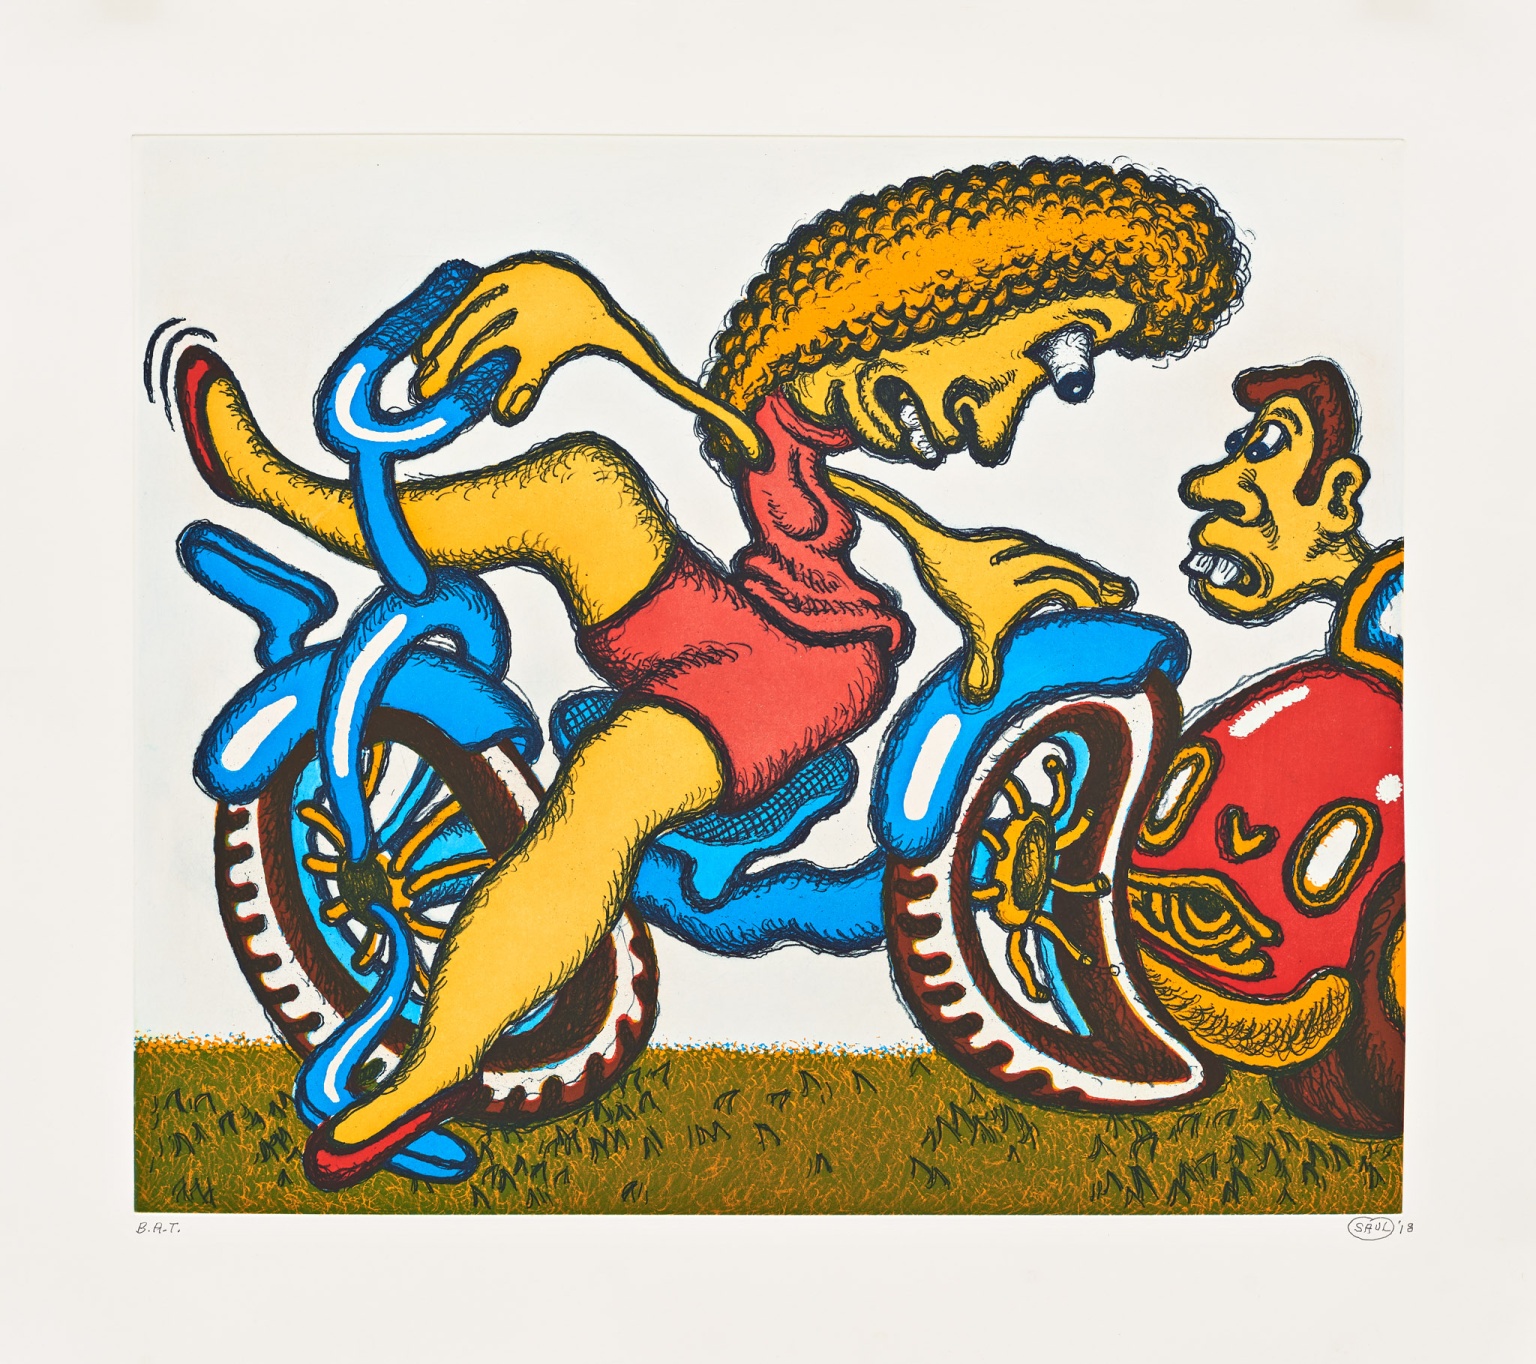 "Collision" (2018) by Peter Saul